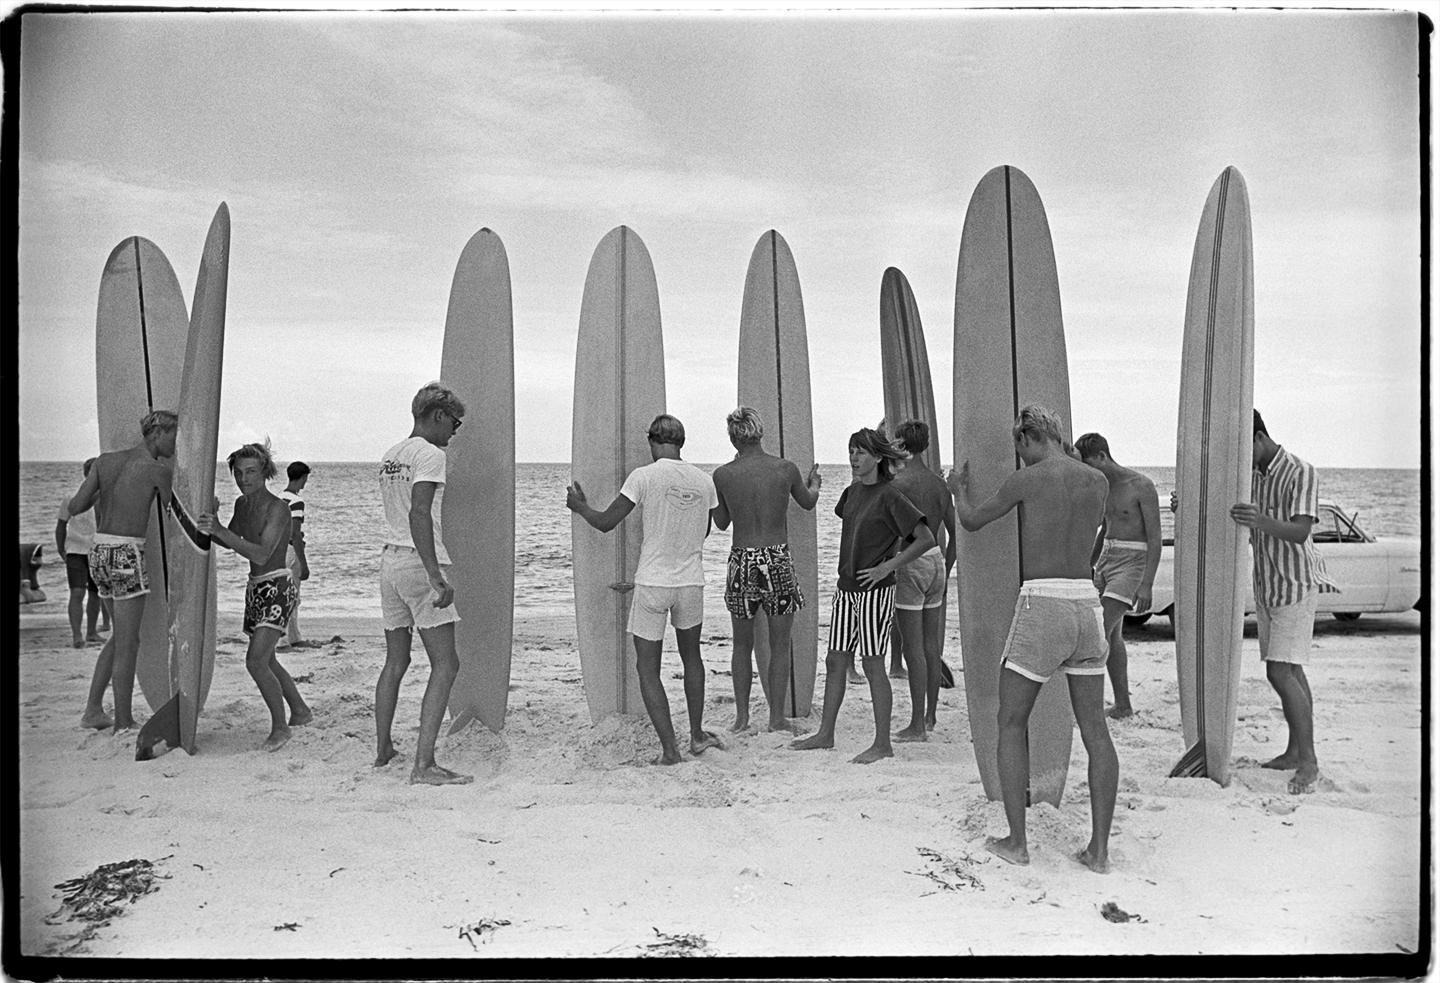 Surfboards in the Sand by Al Satterwhite is a 16 x 20 inch archival pigment print, available in an edition of 25. This photograph features a group of teenagers with their surfboards in the sand, waiting to go into the ocean. This photograph is